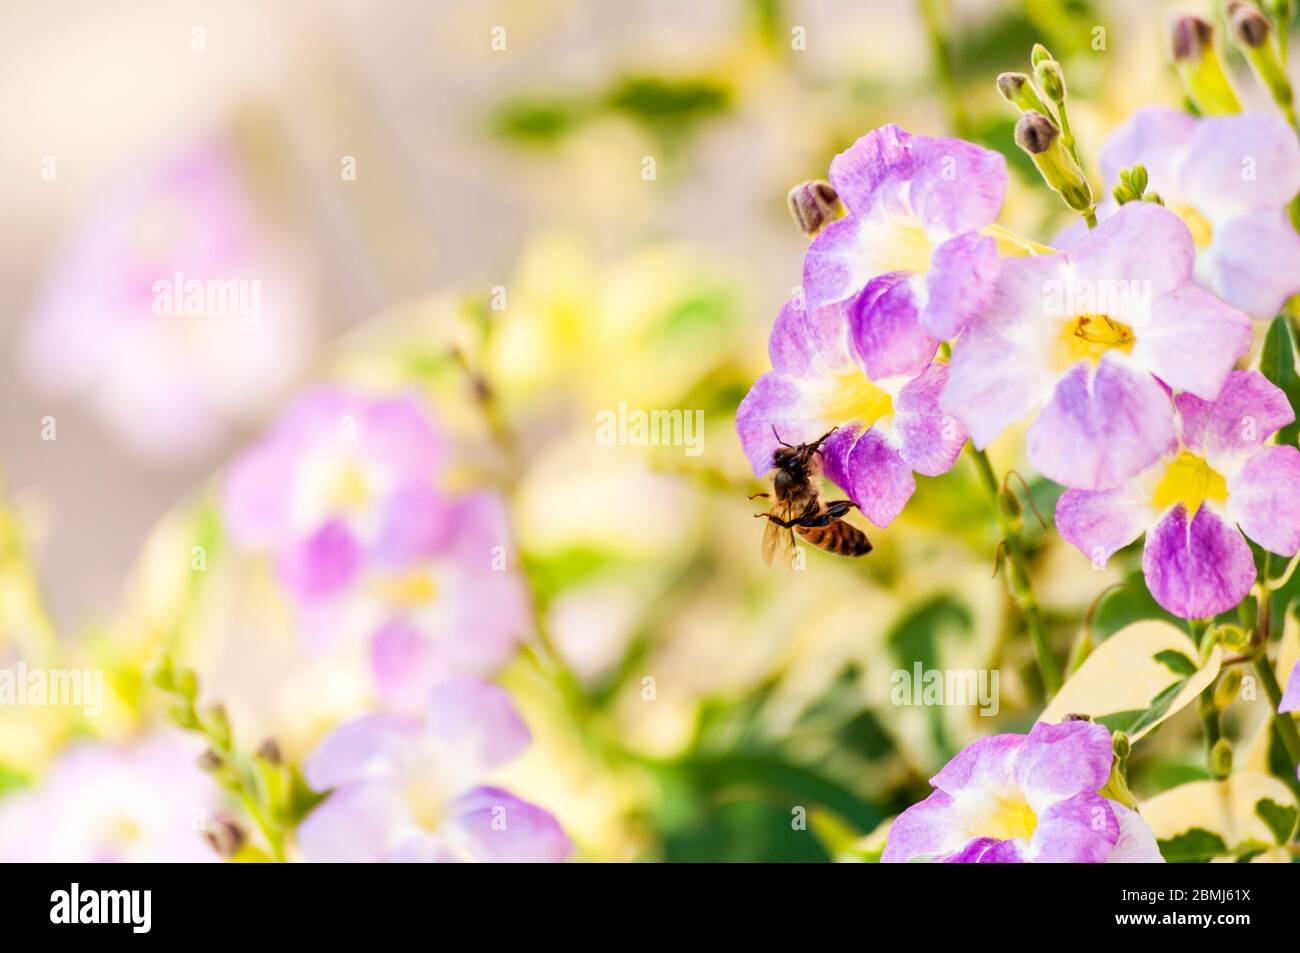 A lonely cuban honey bee working in a garden. Stock Photo